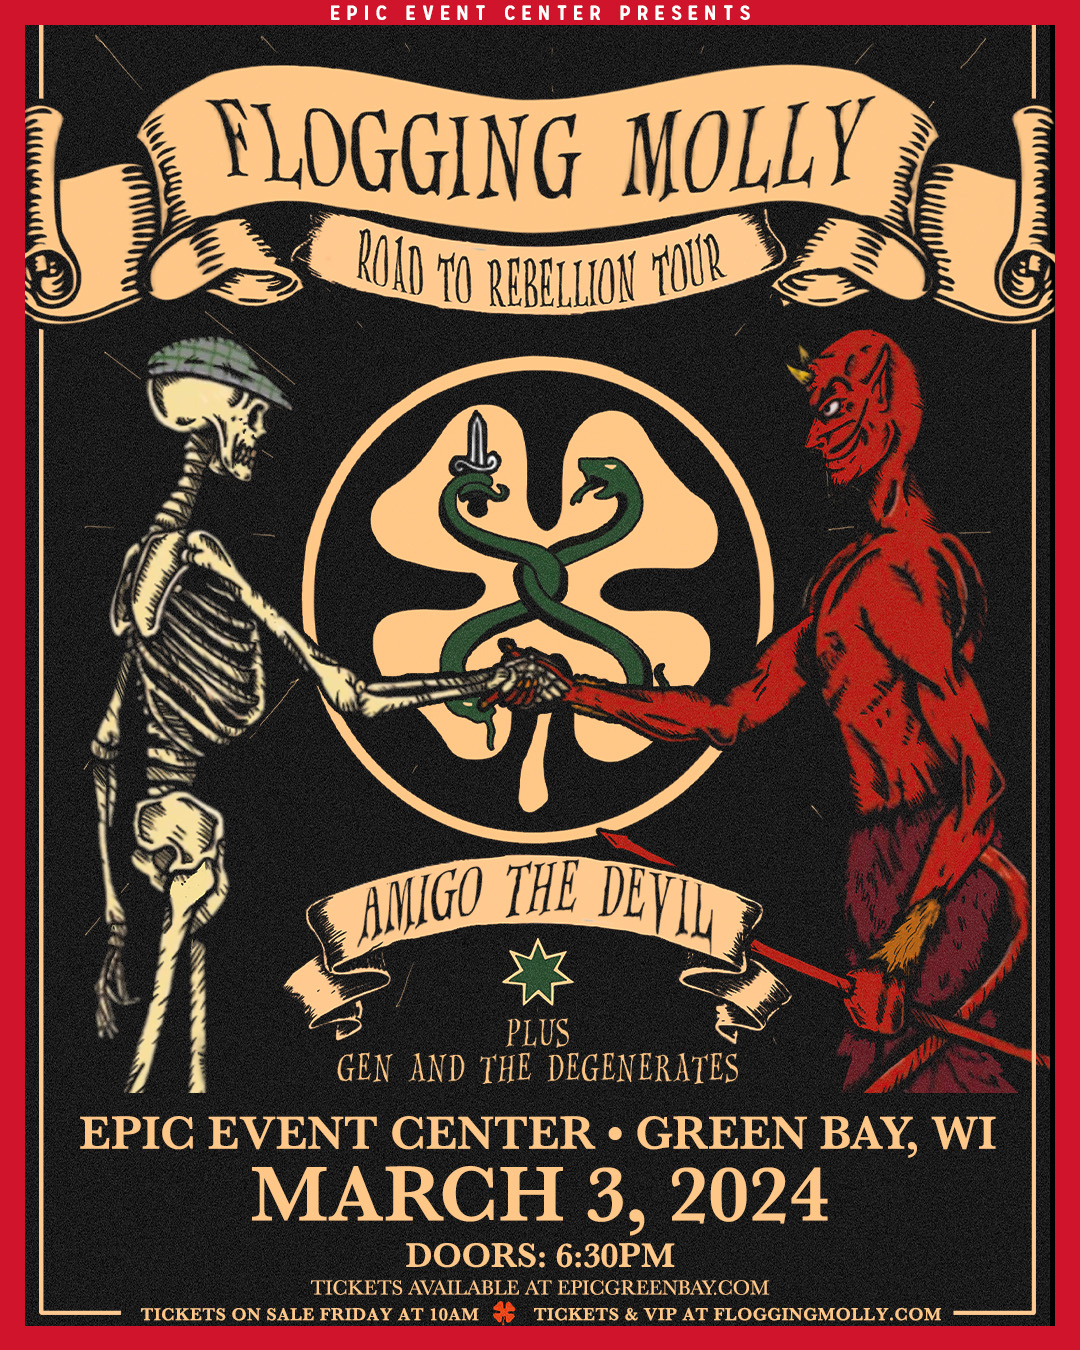 Flogging Molly is coming to The Epic Event Center!!!